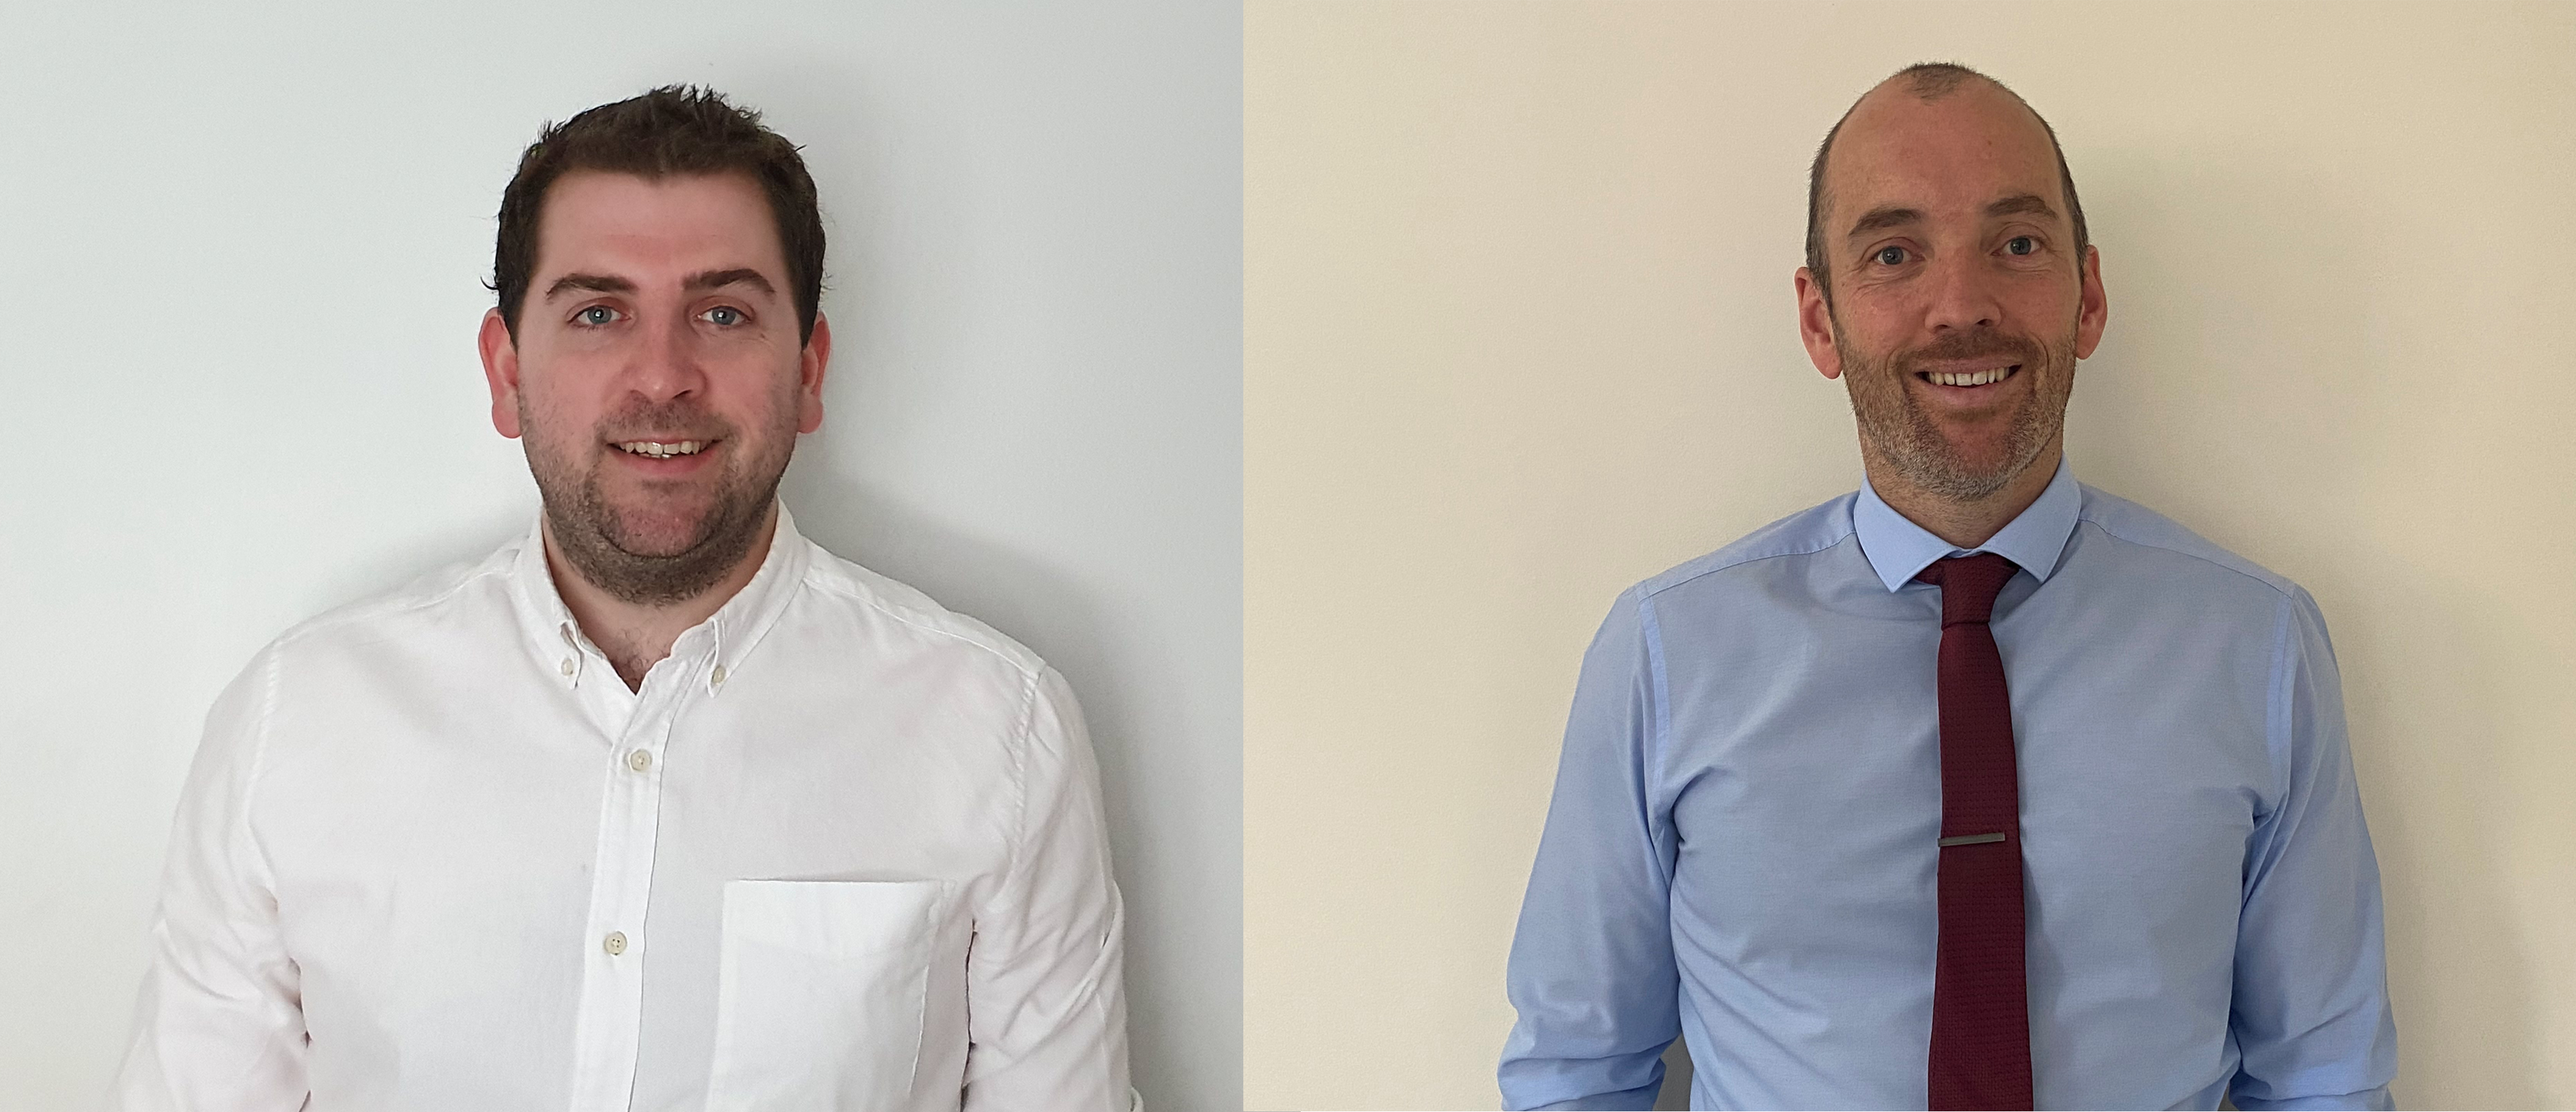 From left to right - Chris Jeacott, Business Development Manager, London and South East and Jon Parry, Business Development Manager, South and West Wales